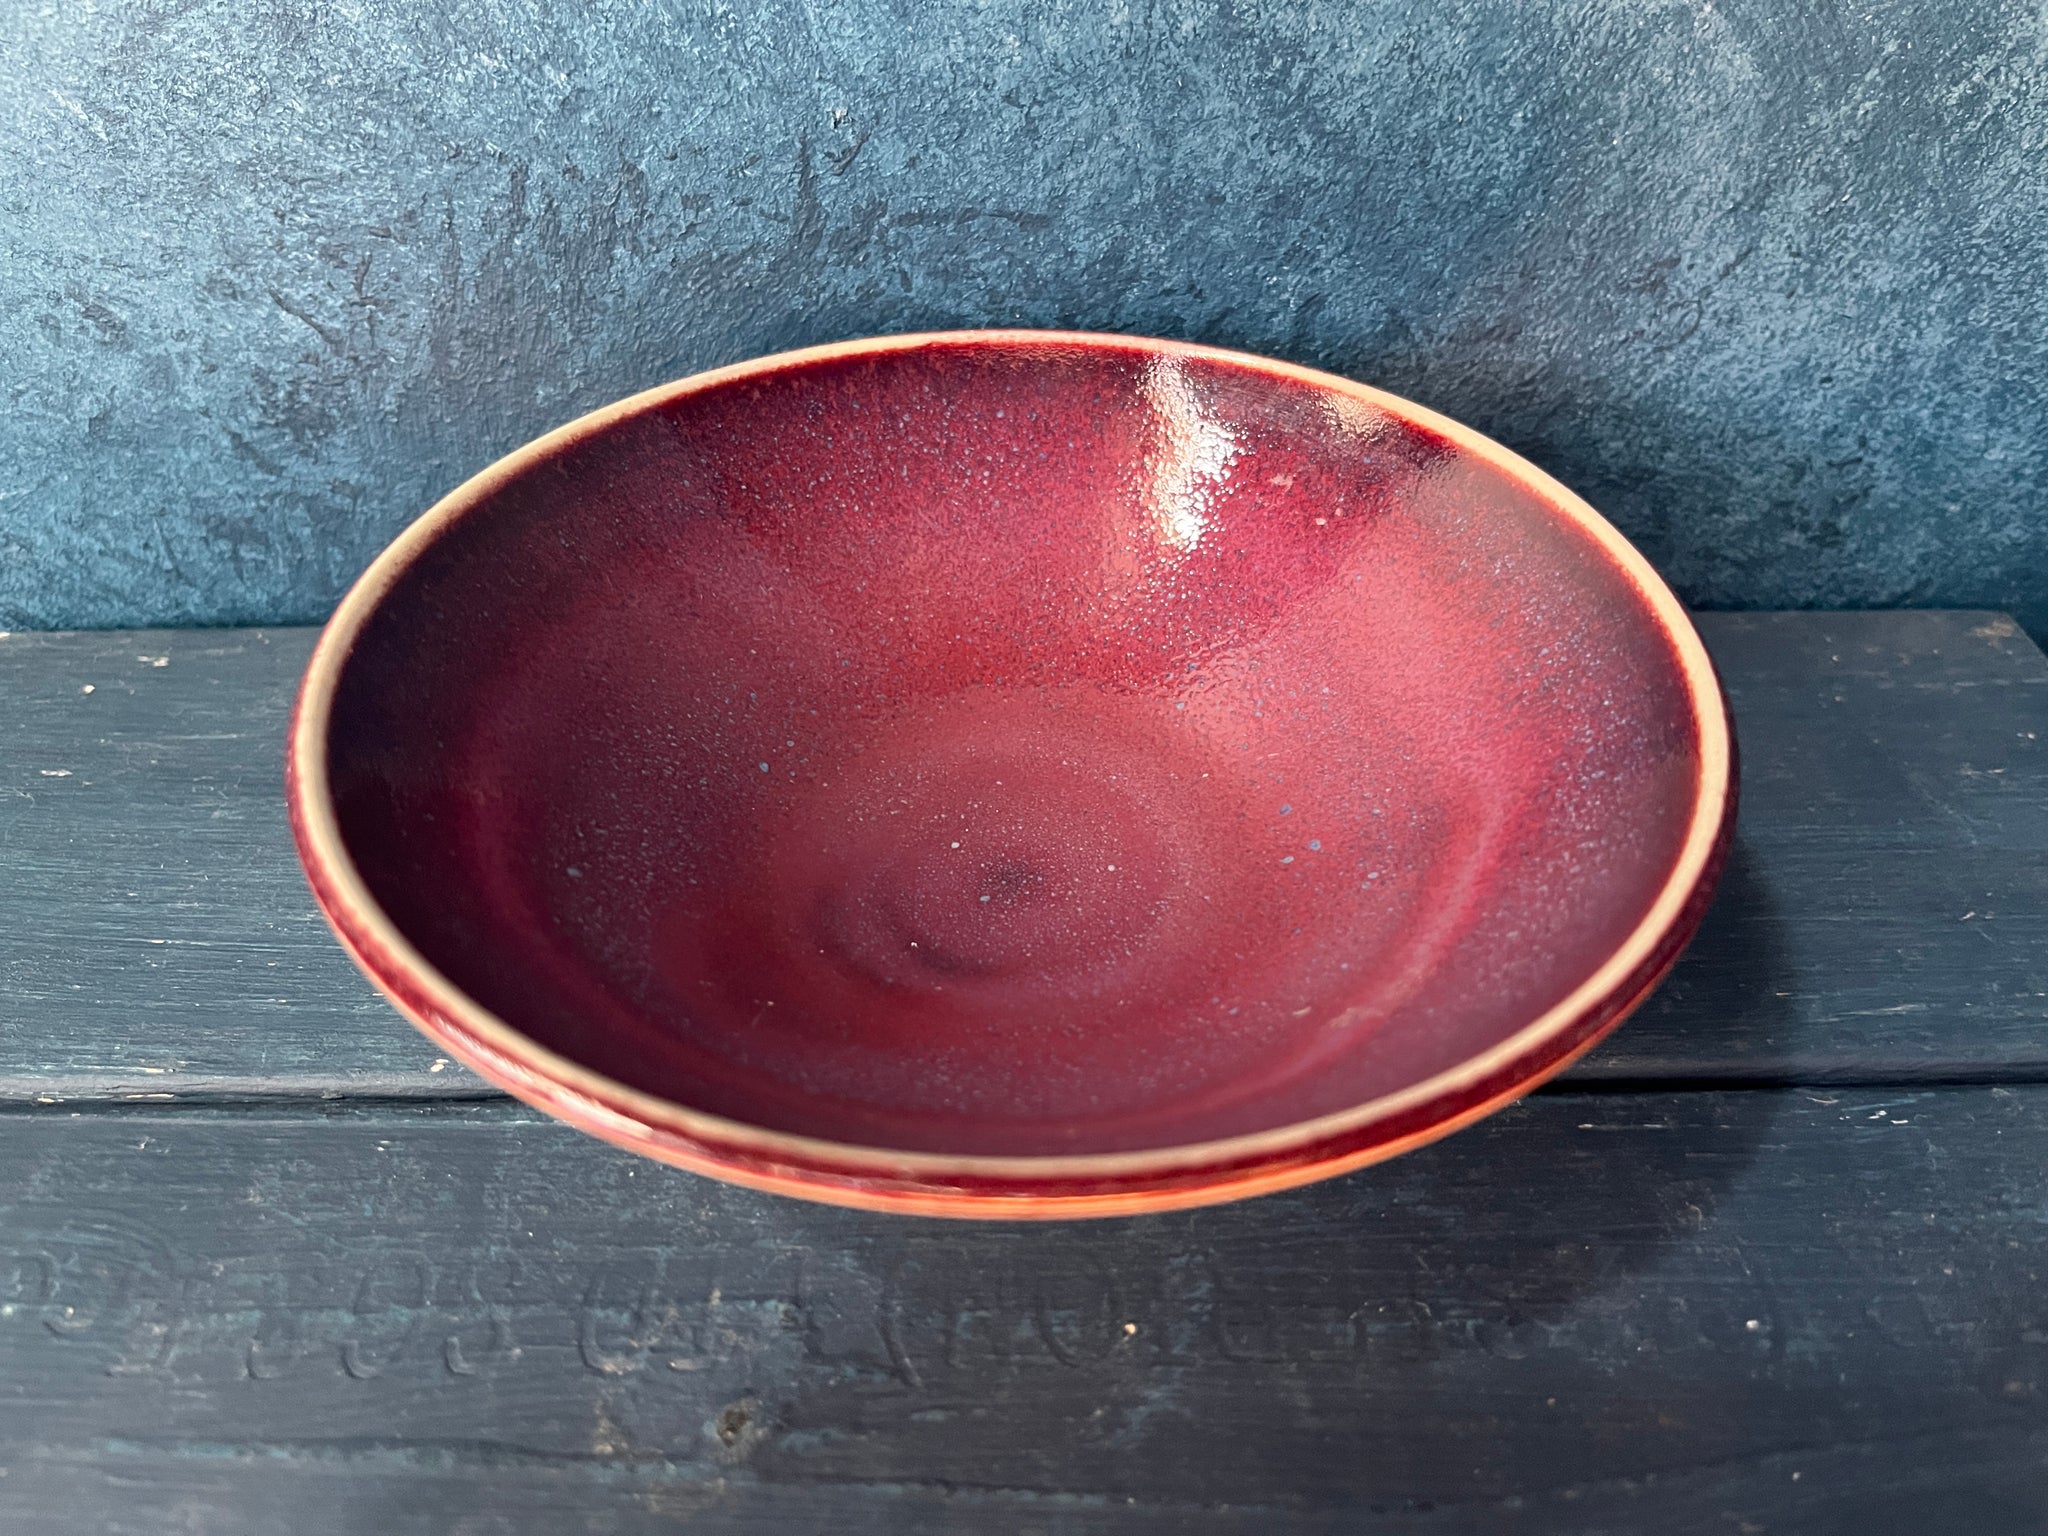 Copper red waterfall bowls Japanese Bowl